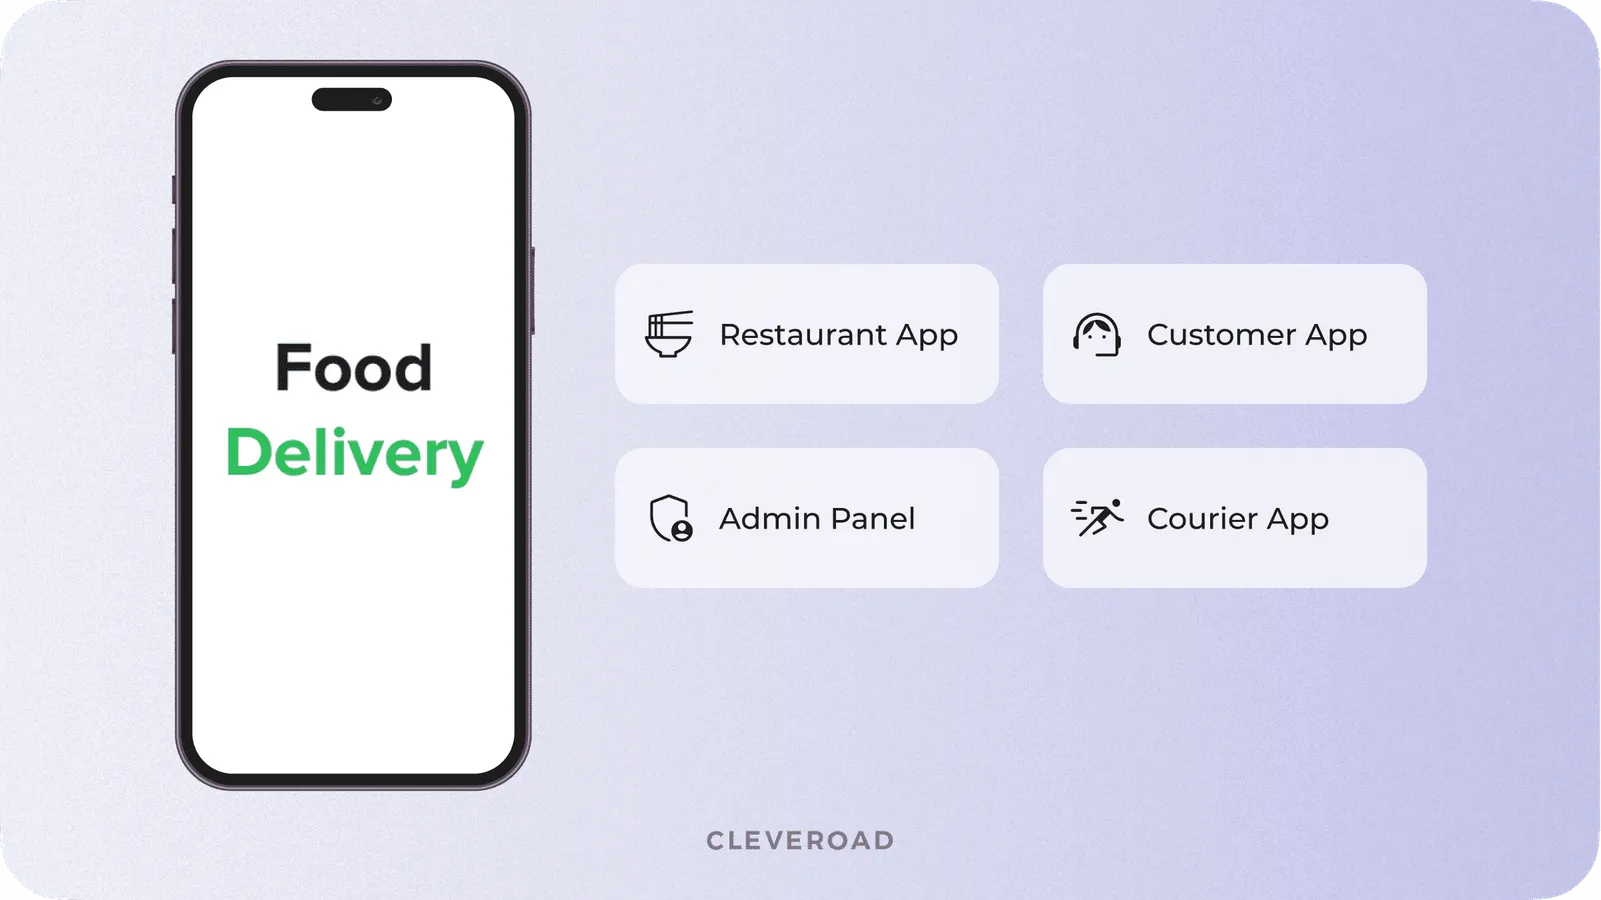 Four main apps of food delivery ecosystem